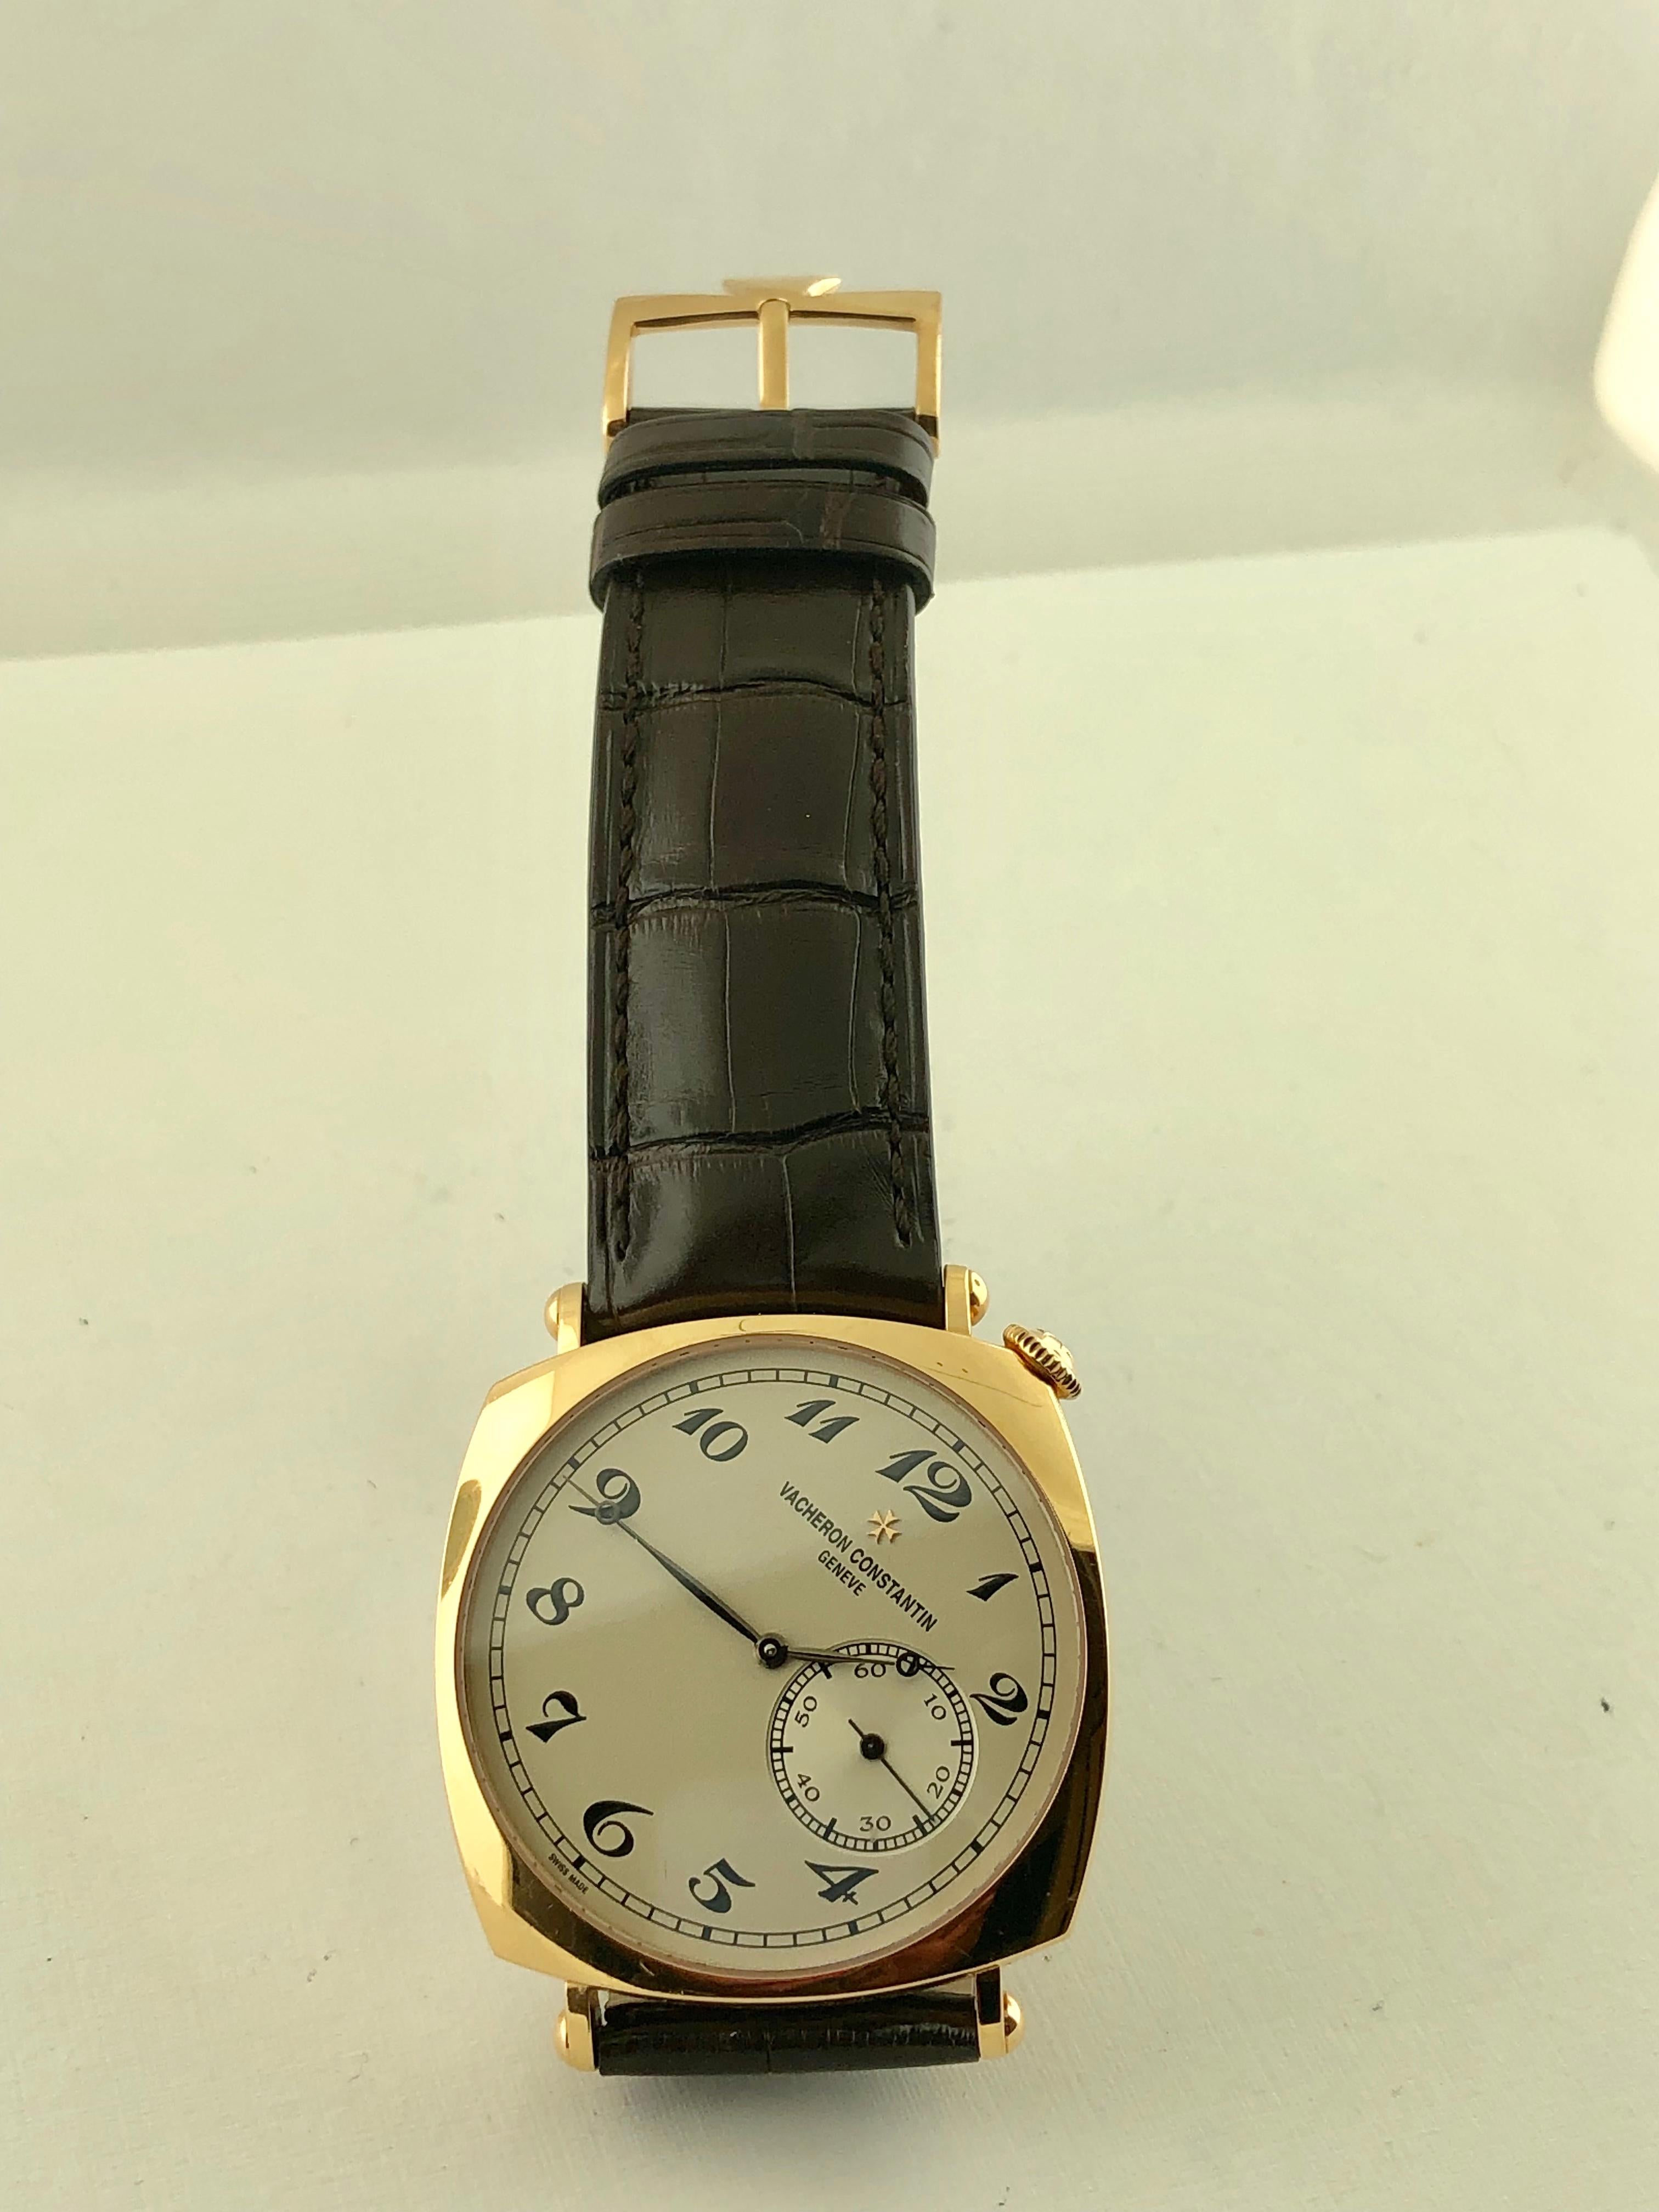 Vacheron Constantin Historiques American 1921 18 Karat Rose Gold Watch In Good Condition For Sale In Ft. Lauderdale, FL